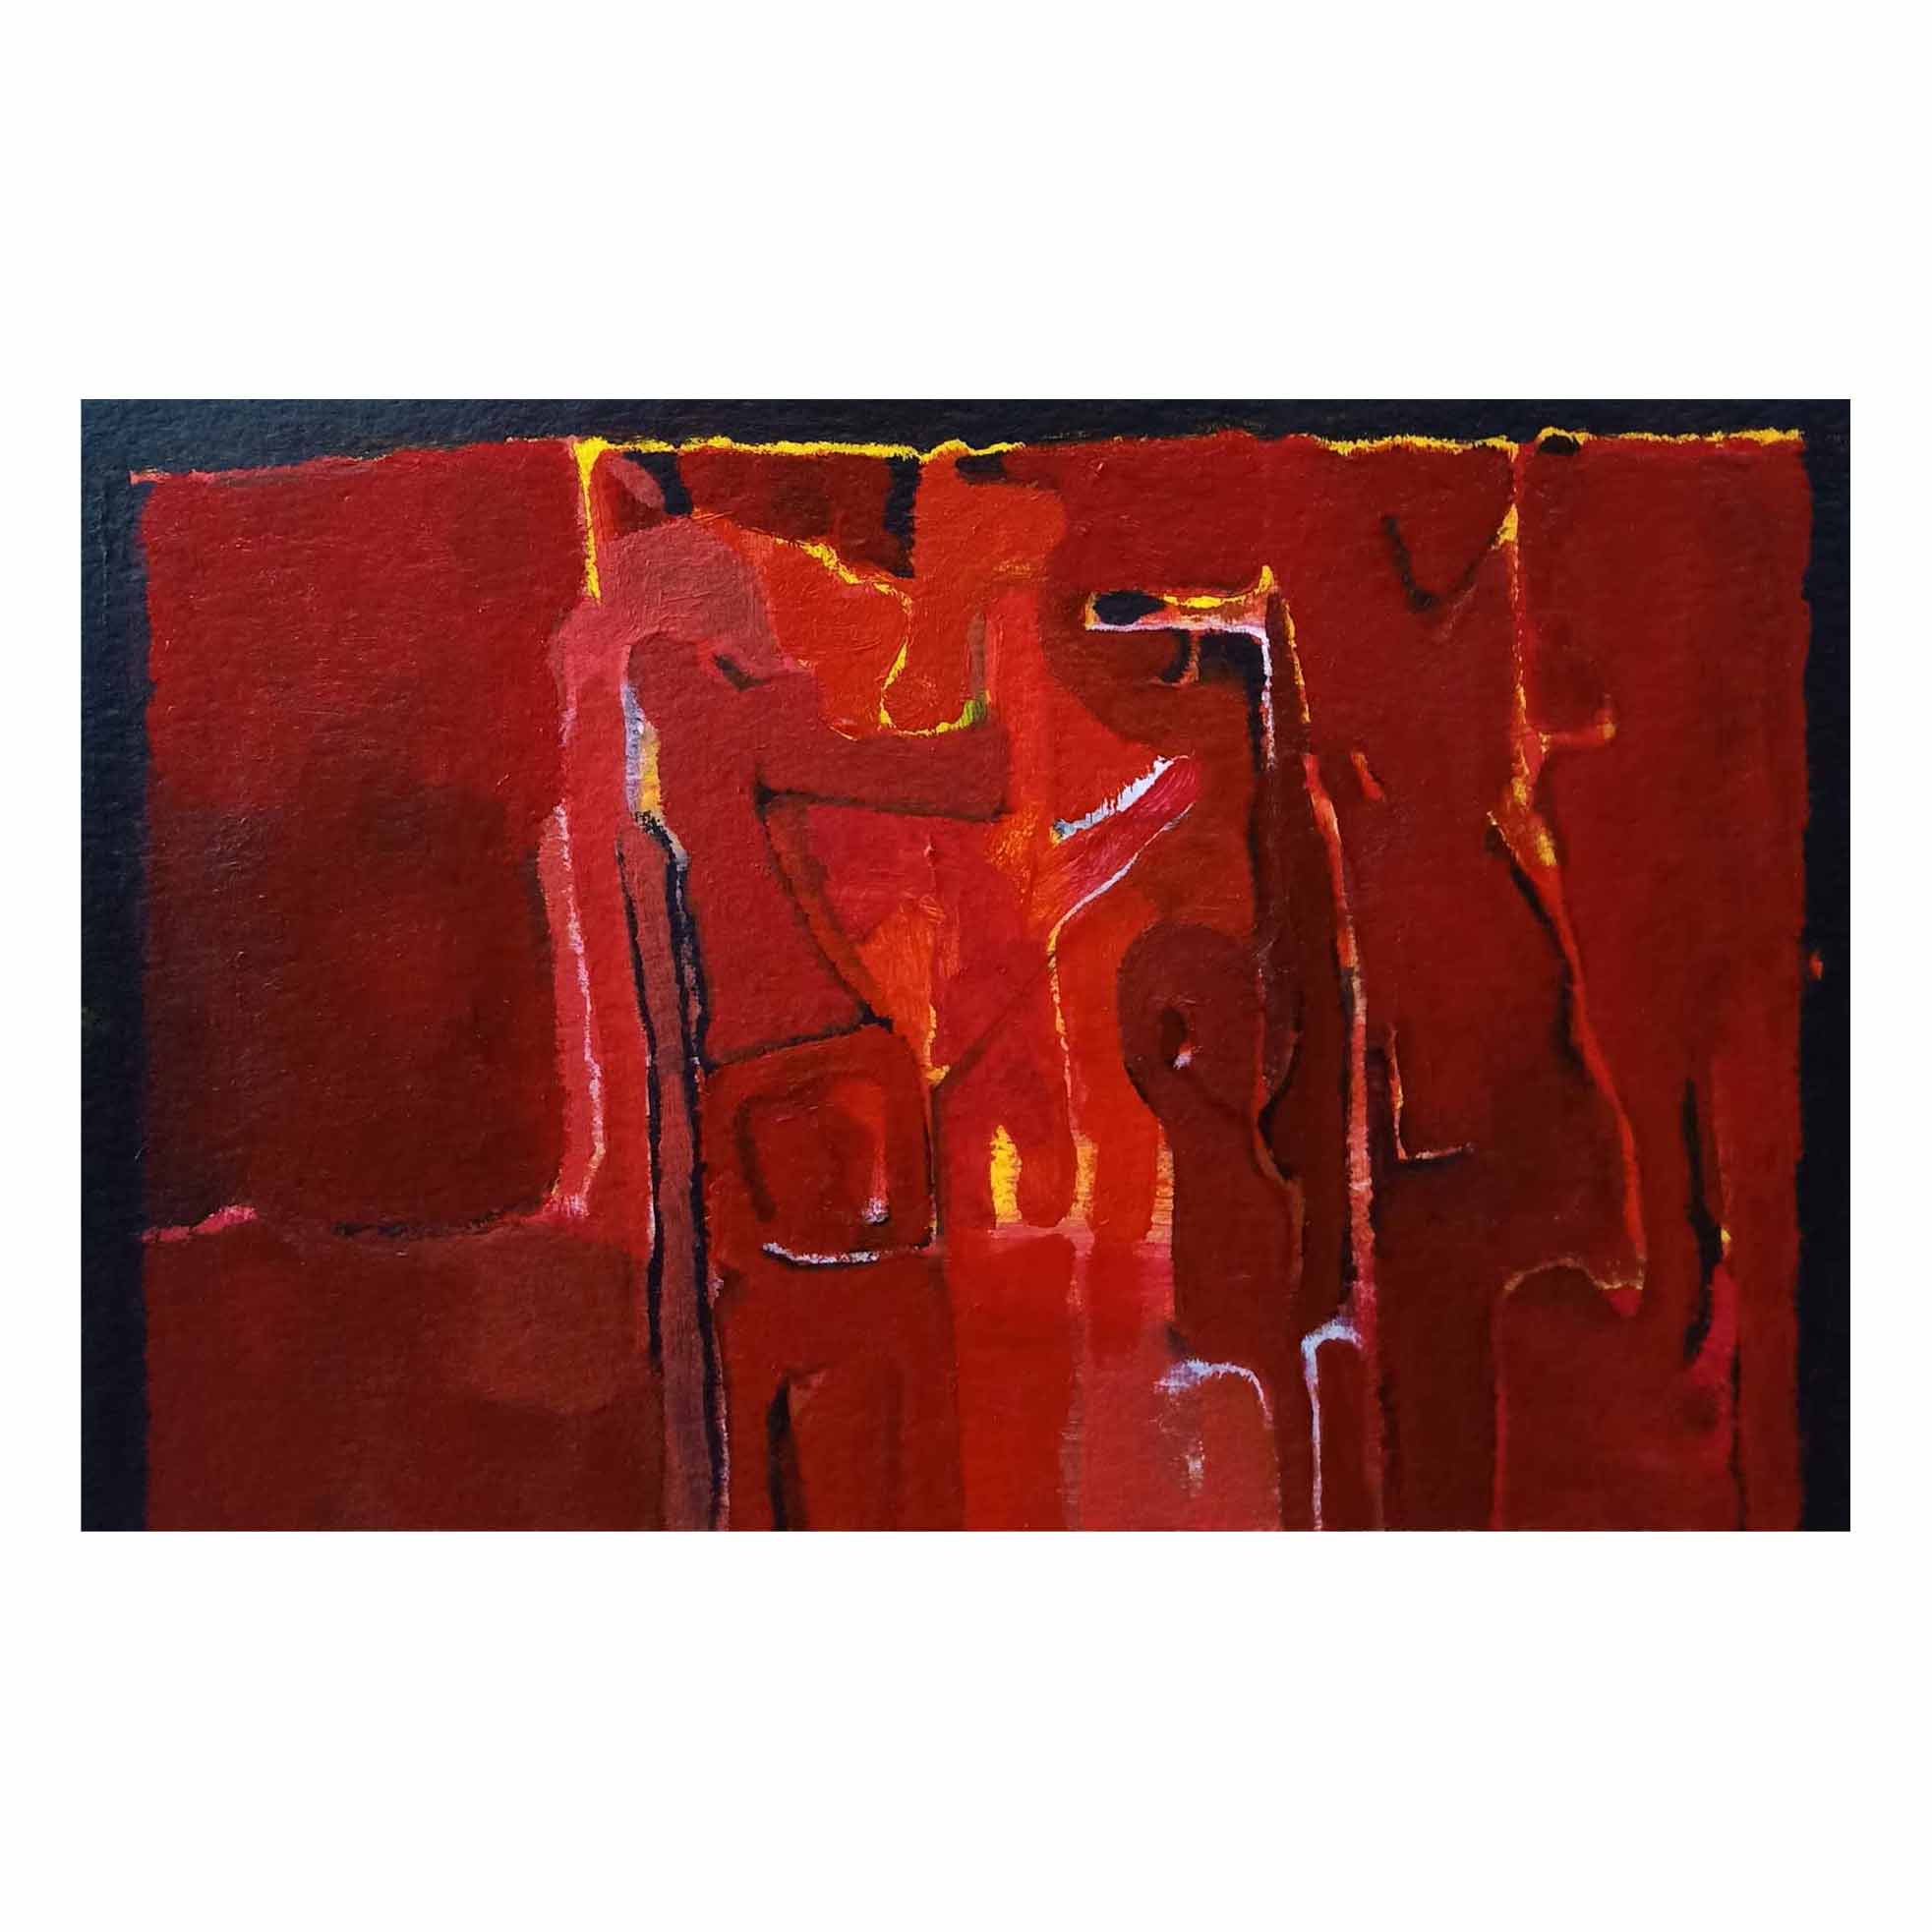 Abstract Painting with Acrylic on Paper "Abstract-3" art by Abhijeet Shantaram Ghawale